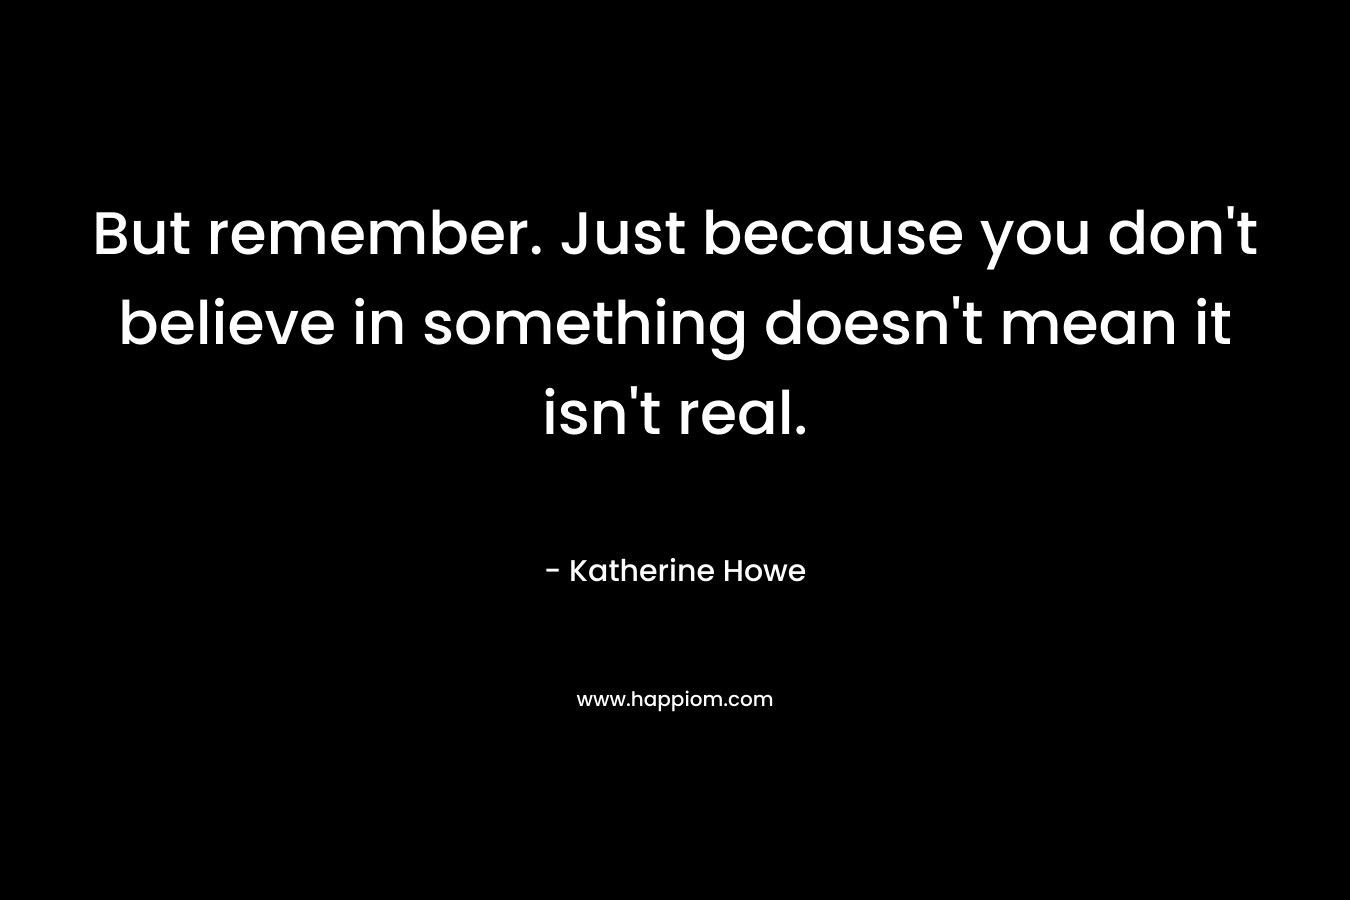 But remember. Just because you don’t believe in something doesn’t mean it isn’t real. – Katherine Howe